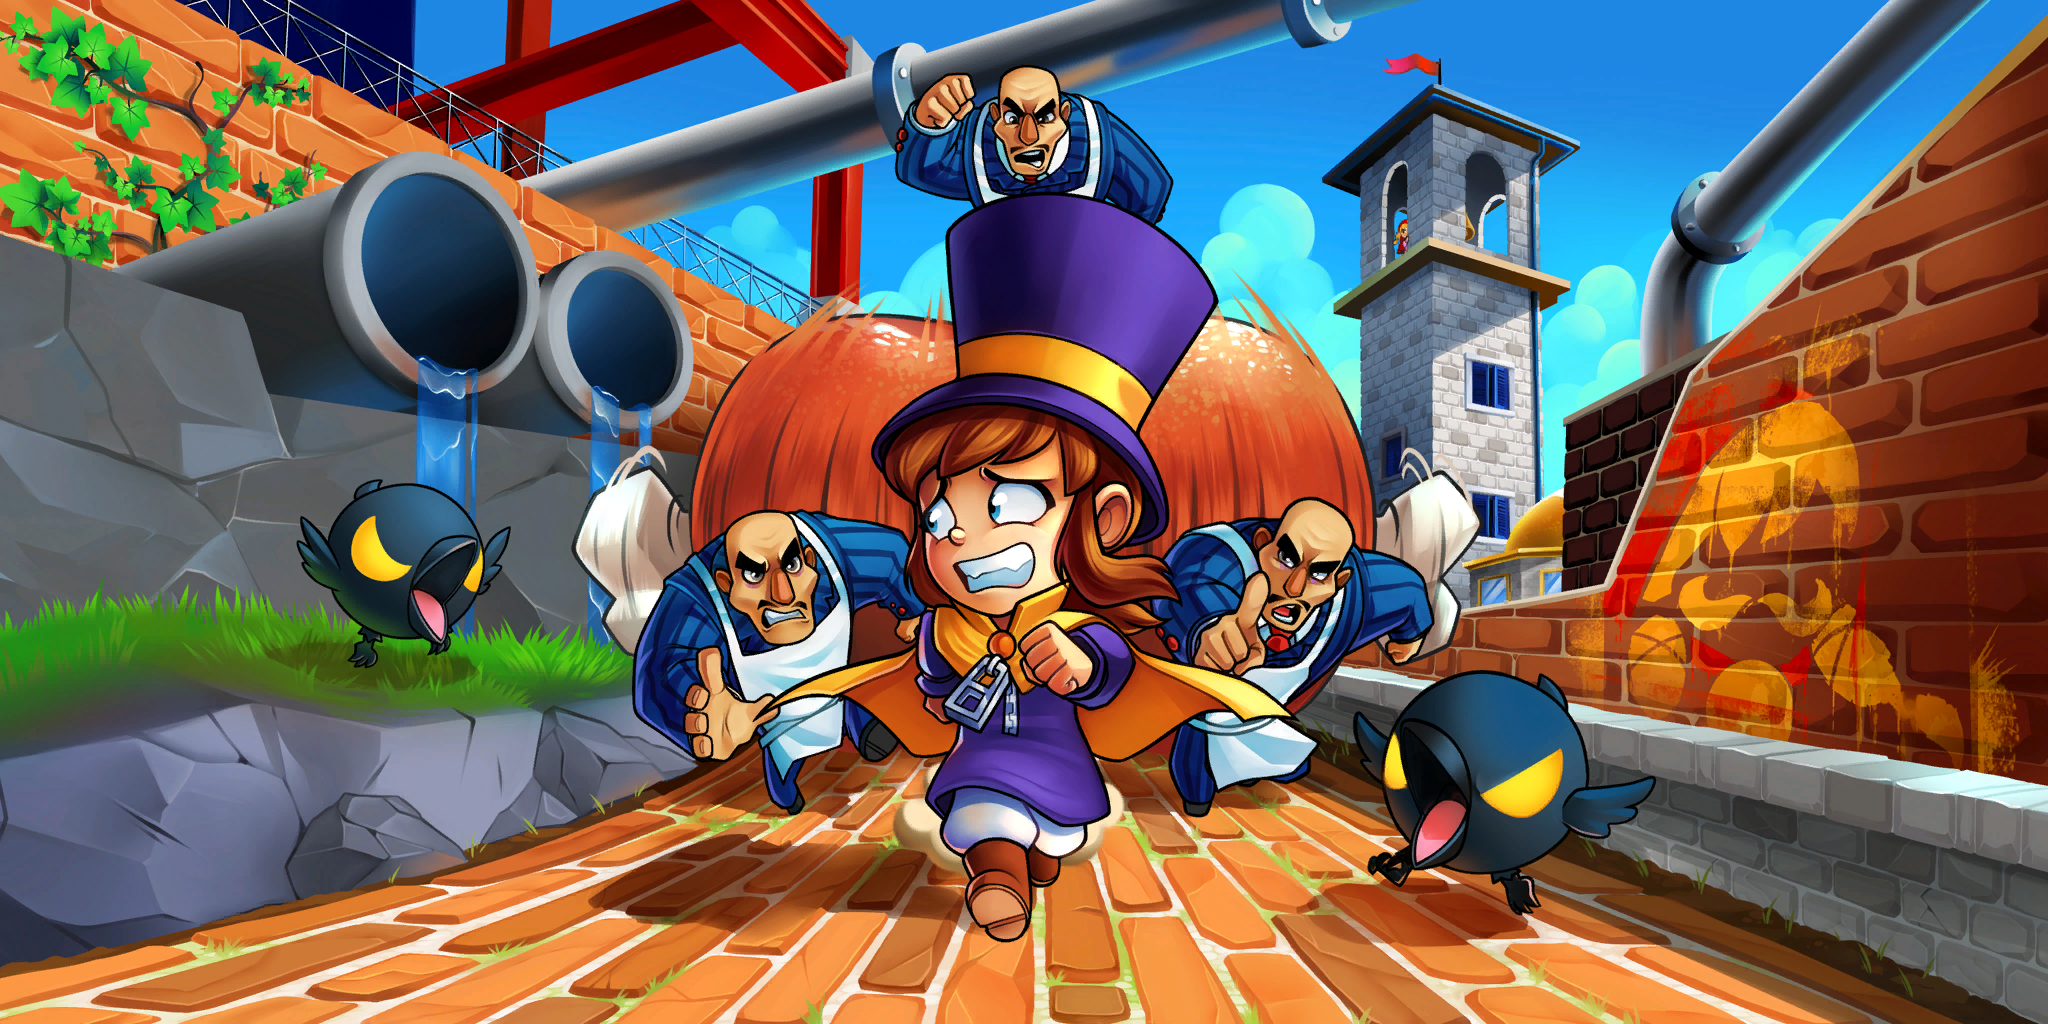 General 2048x1024 video games A Hat In Time running hat video game characters